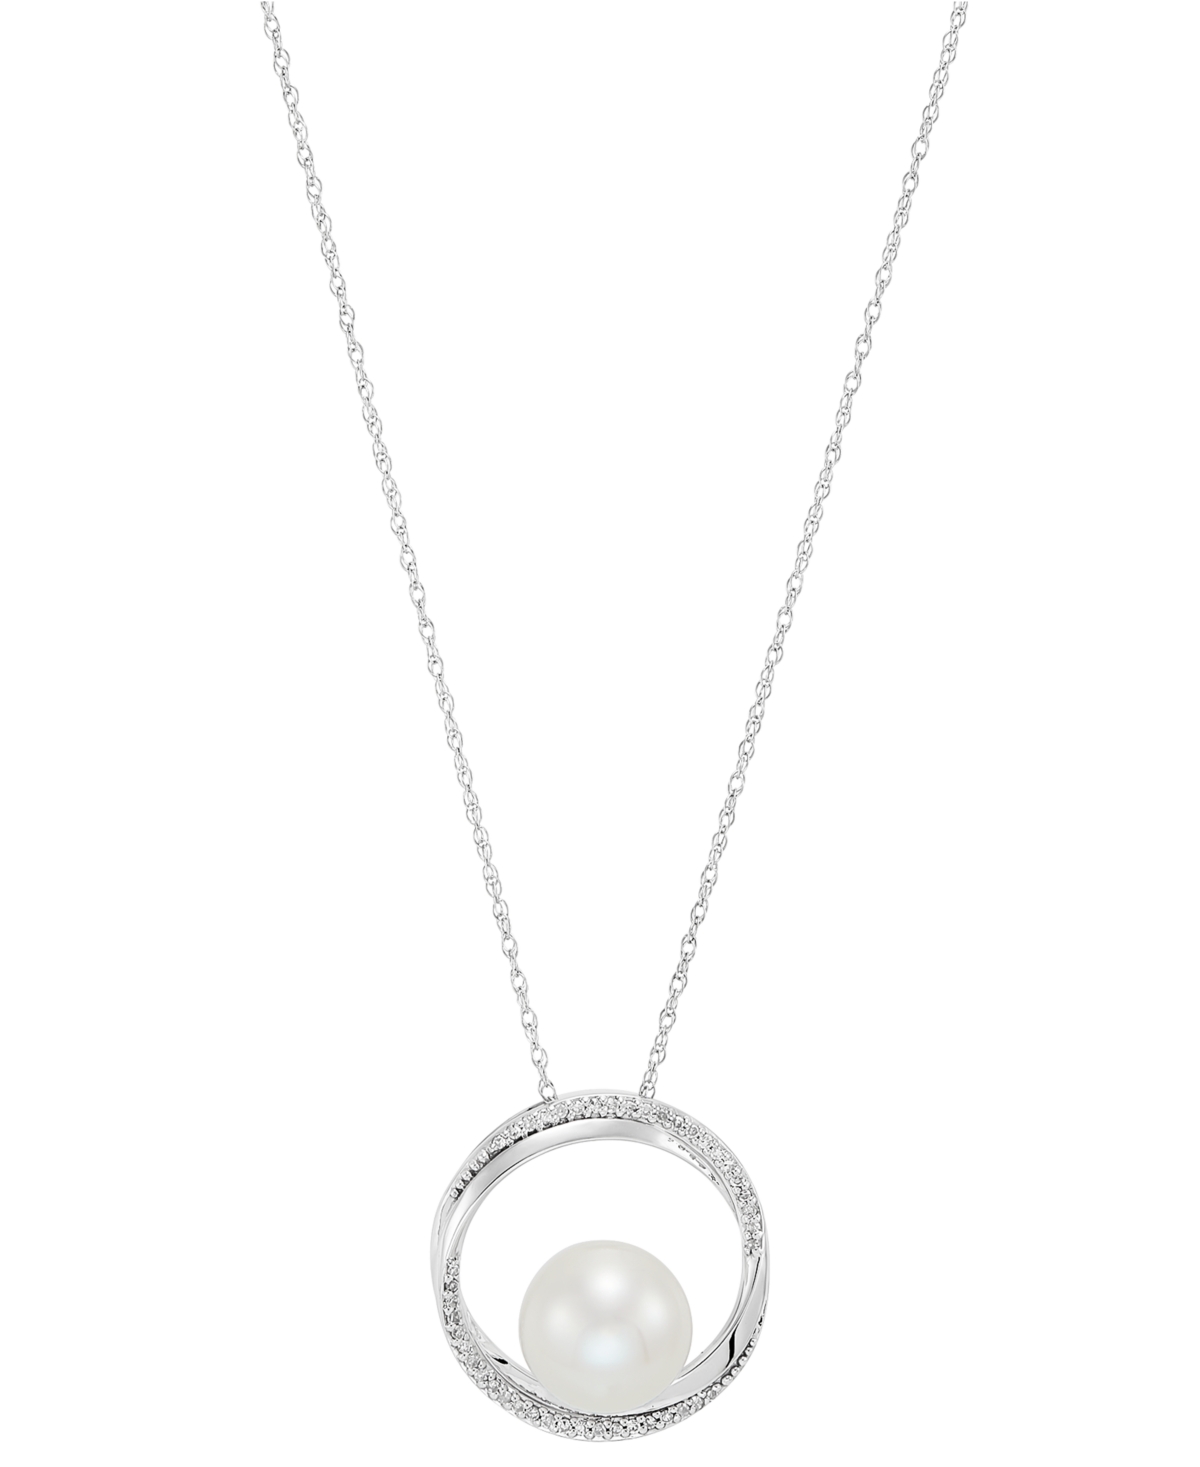 Cultured Freshwater Pearl (9mm) & Diamond (1/10 ct. t.w.) Circle 18" Pendant Necklace in 14k White Gold - White Gold